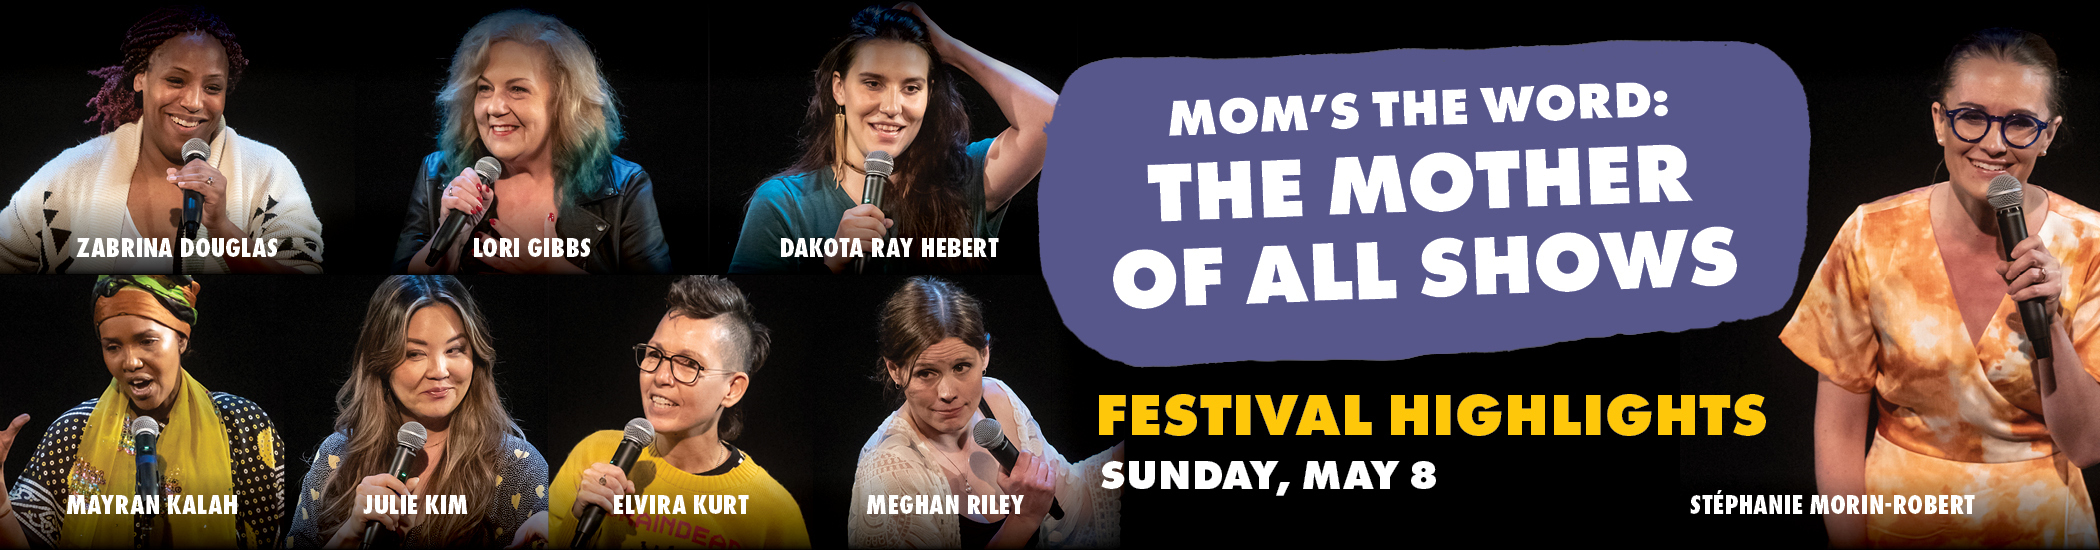 Mom's the Word Festival Highlights